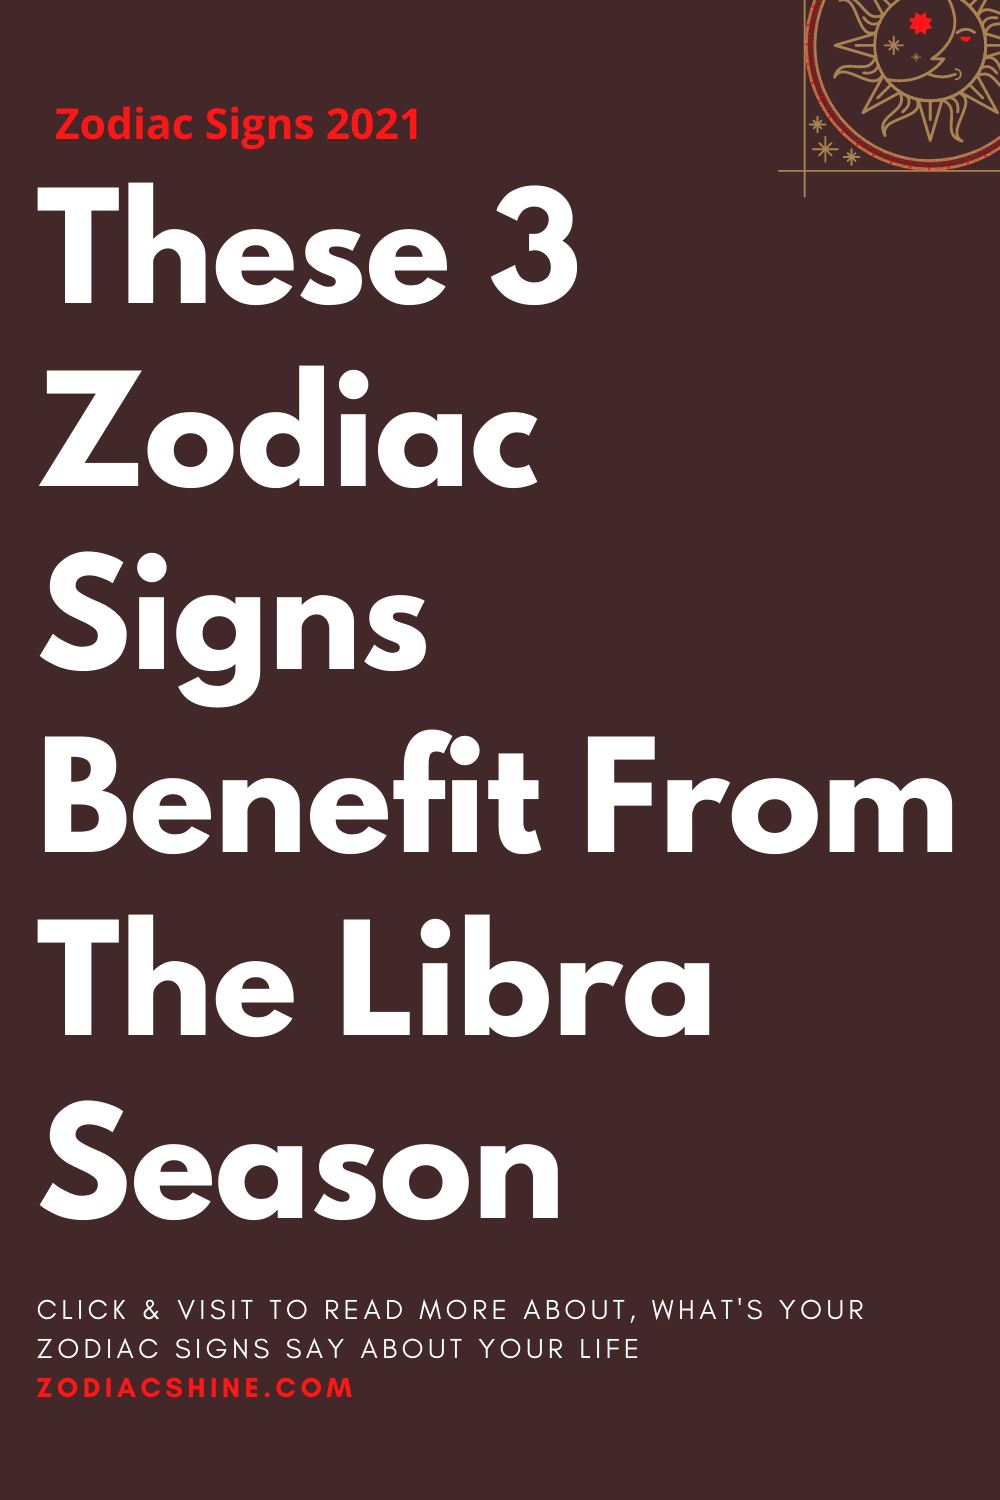 These 3 Zodiac Signs Benefit From The Libra Season